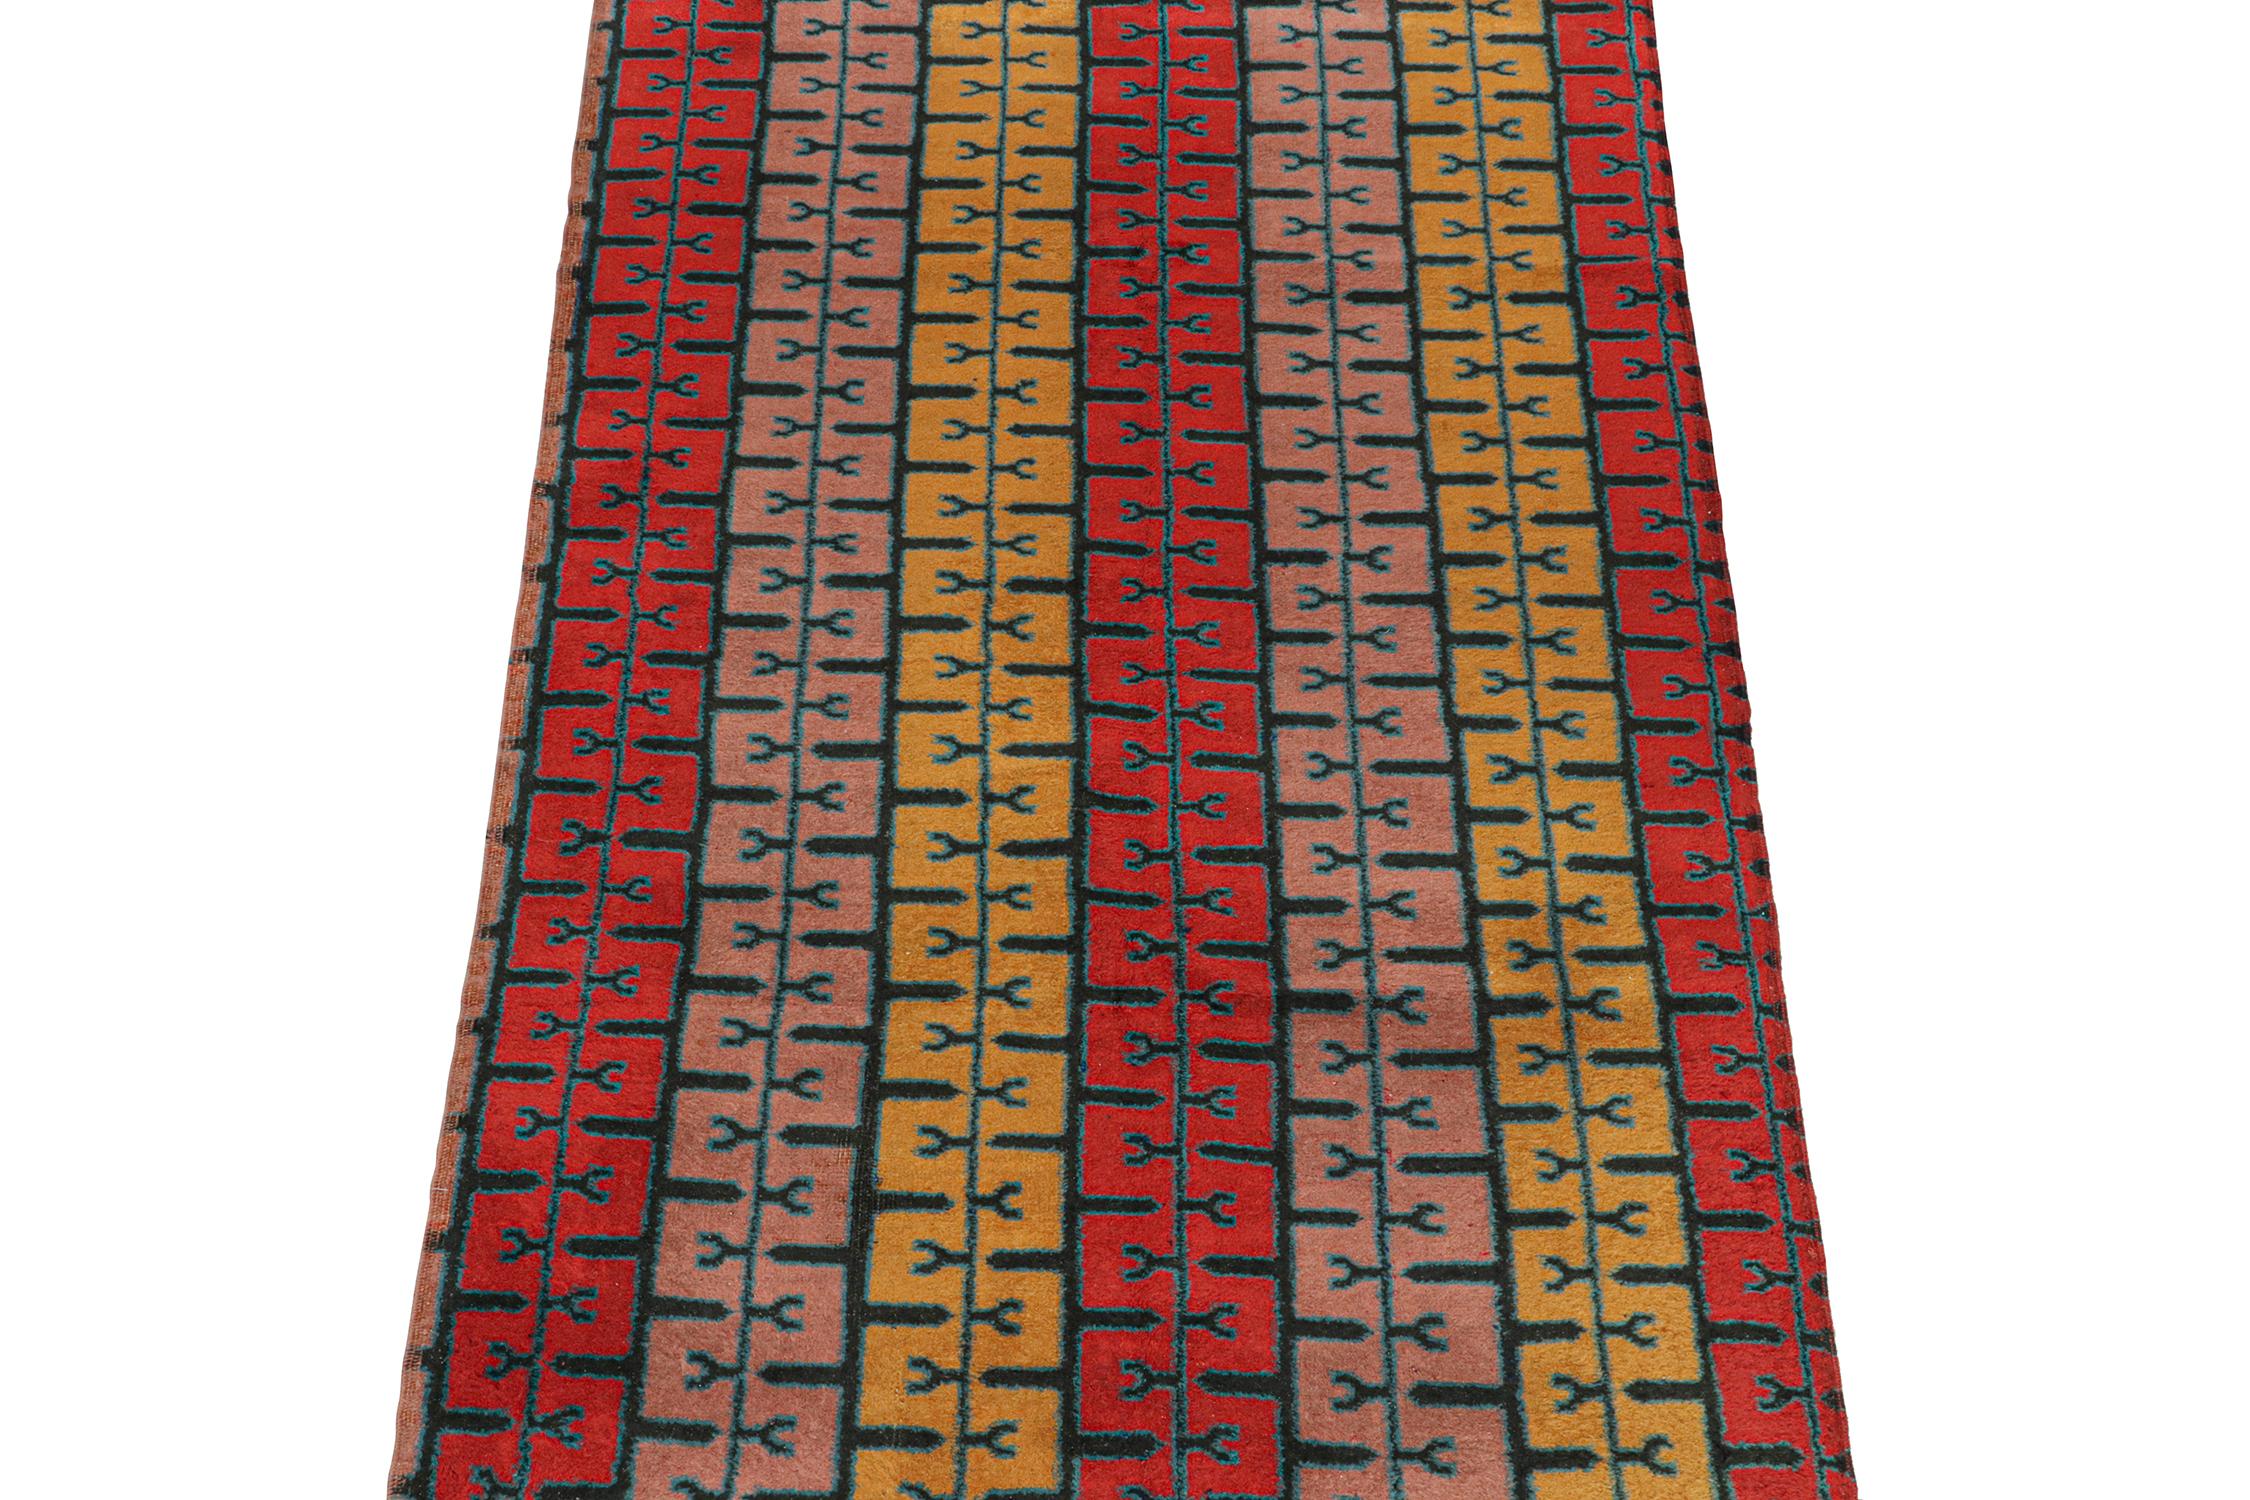 This vintage 4x7 rug from Turkey is an exciting new addition to Rug & Kilim’s mid-century Pasha collection. This line is a commemoration,with rare curations we believe to hail from multidisciplinary Turkish designer Zeki Müren.

Further on the